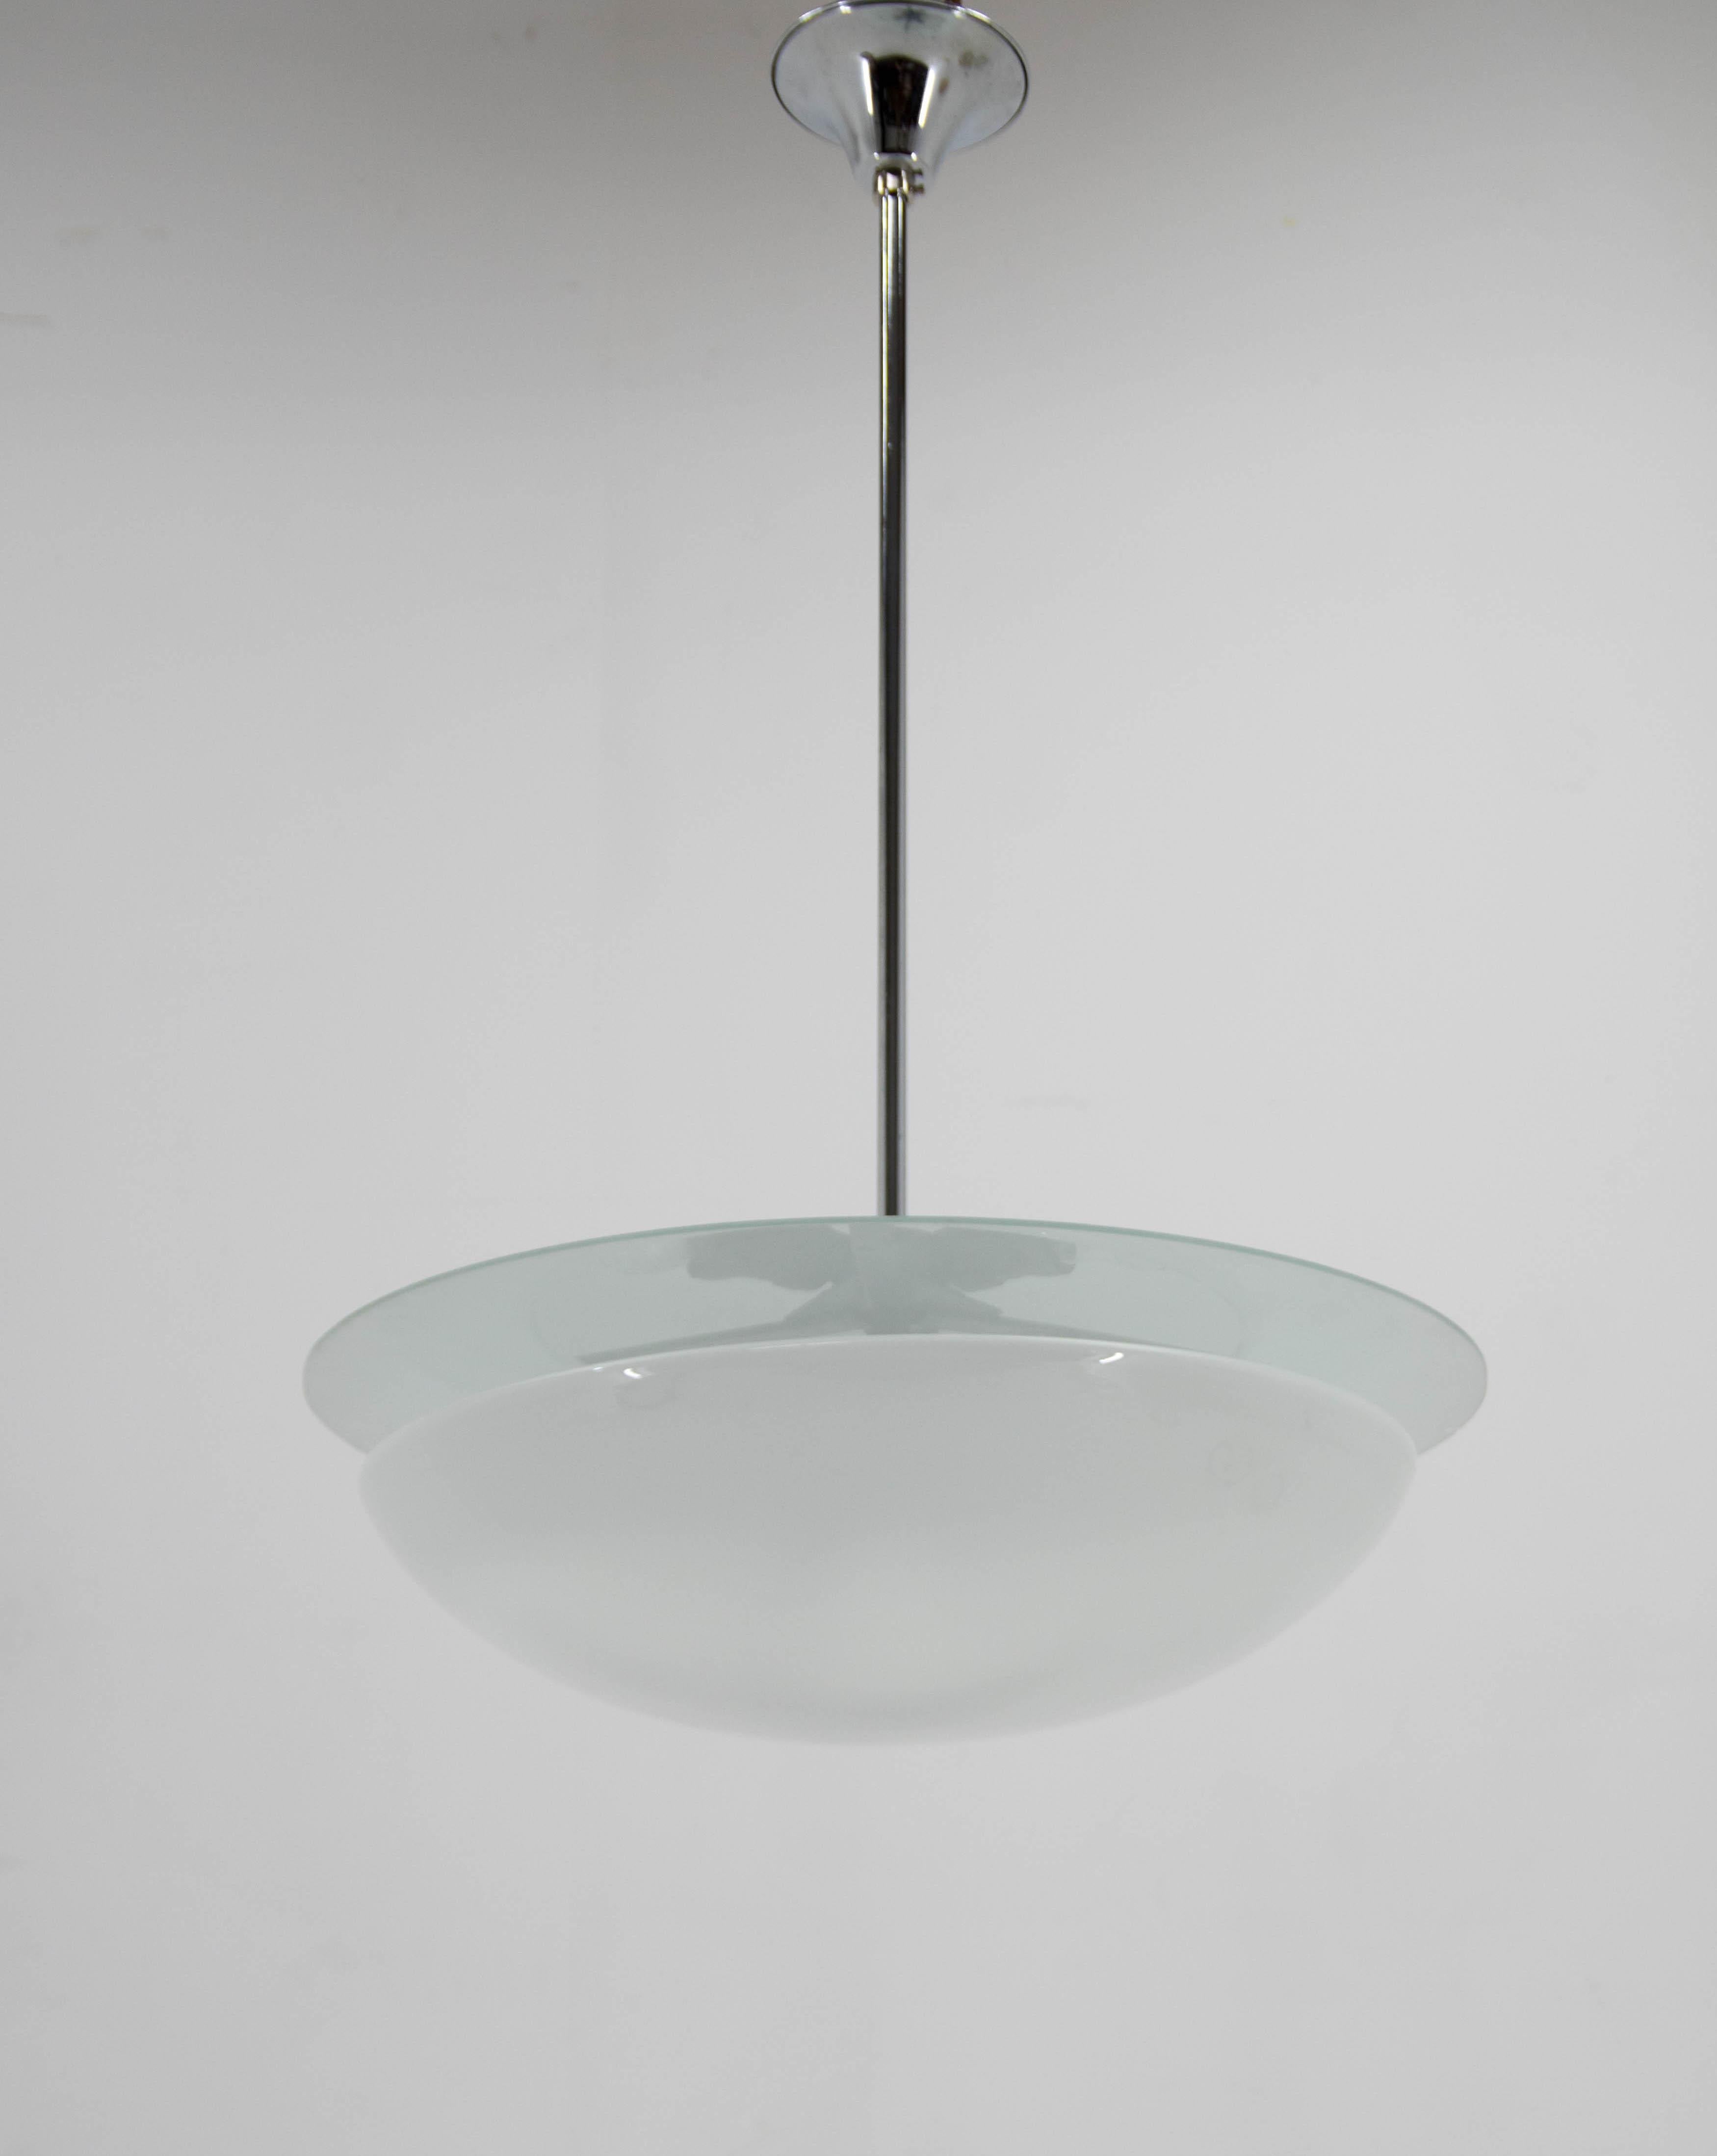 Very rare functionalist / Bauhaus chandelier made and labeled by DRUKOV in Czechoslovakia in 1930s-1940s
Simple and elegant design.
Bottom opaline glass bowl, upper sand blasted flat glass.
Cleaned, rewired: 3x60W, E25-E27 bulbs
US wiring compatible